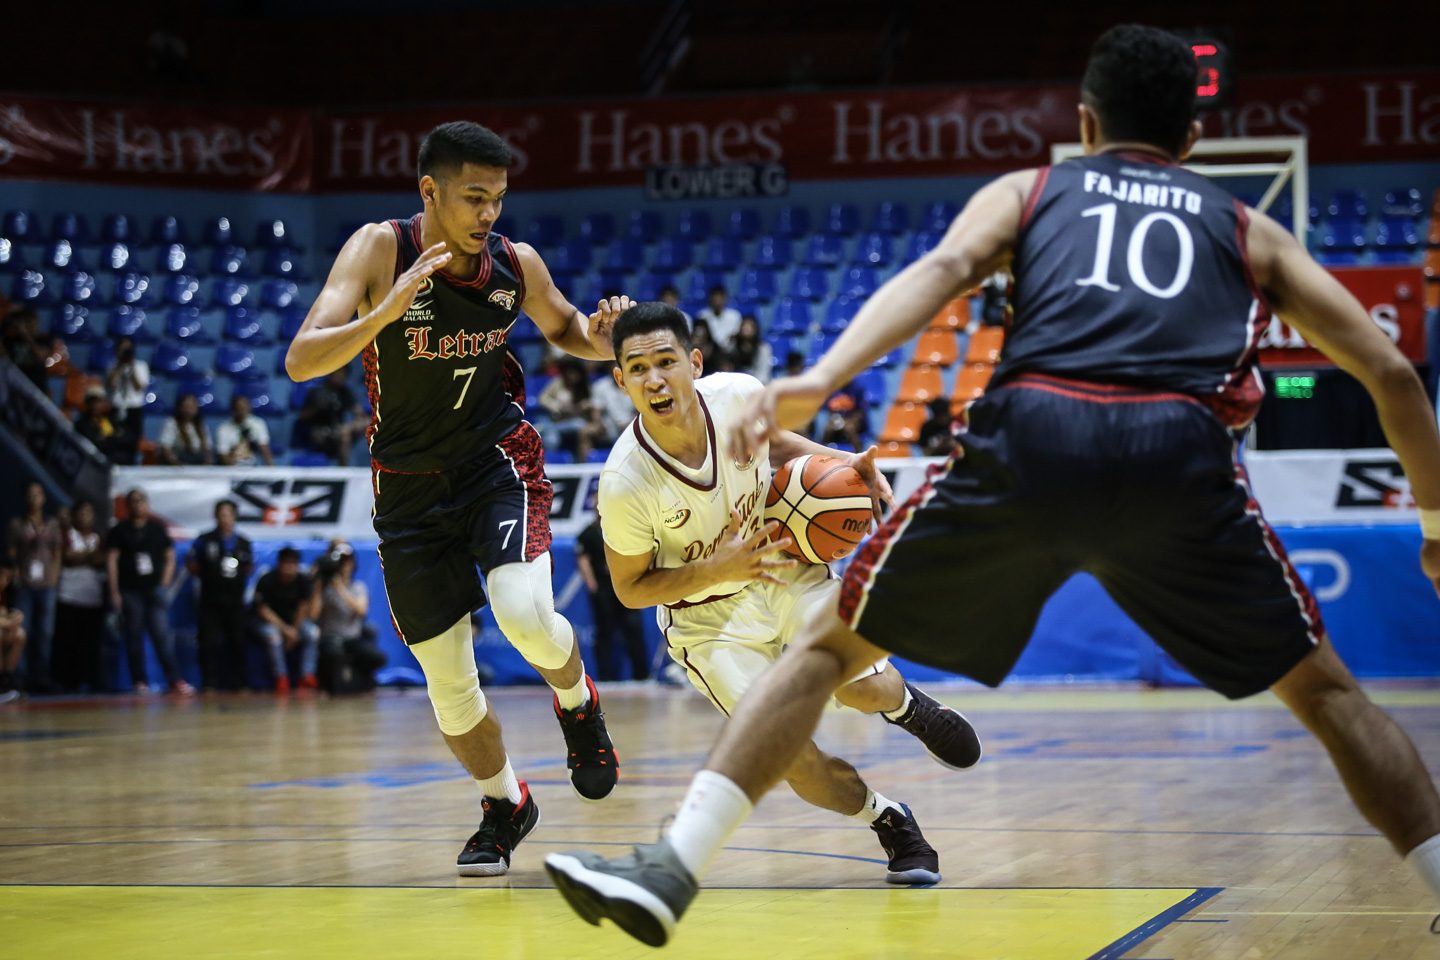 Perpetual may forfeit 9 wins due to ineligibility issues